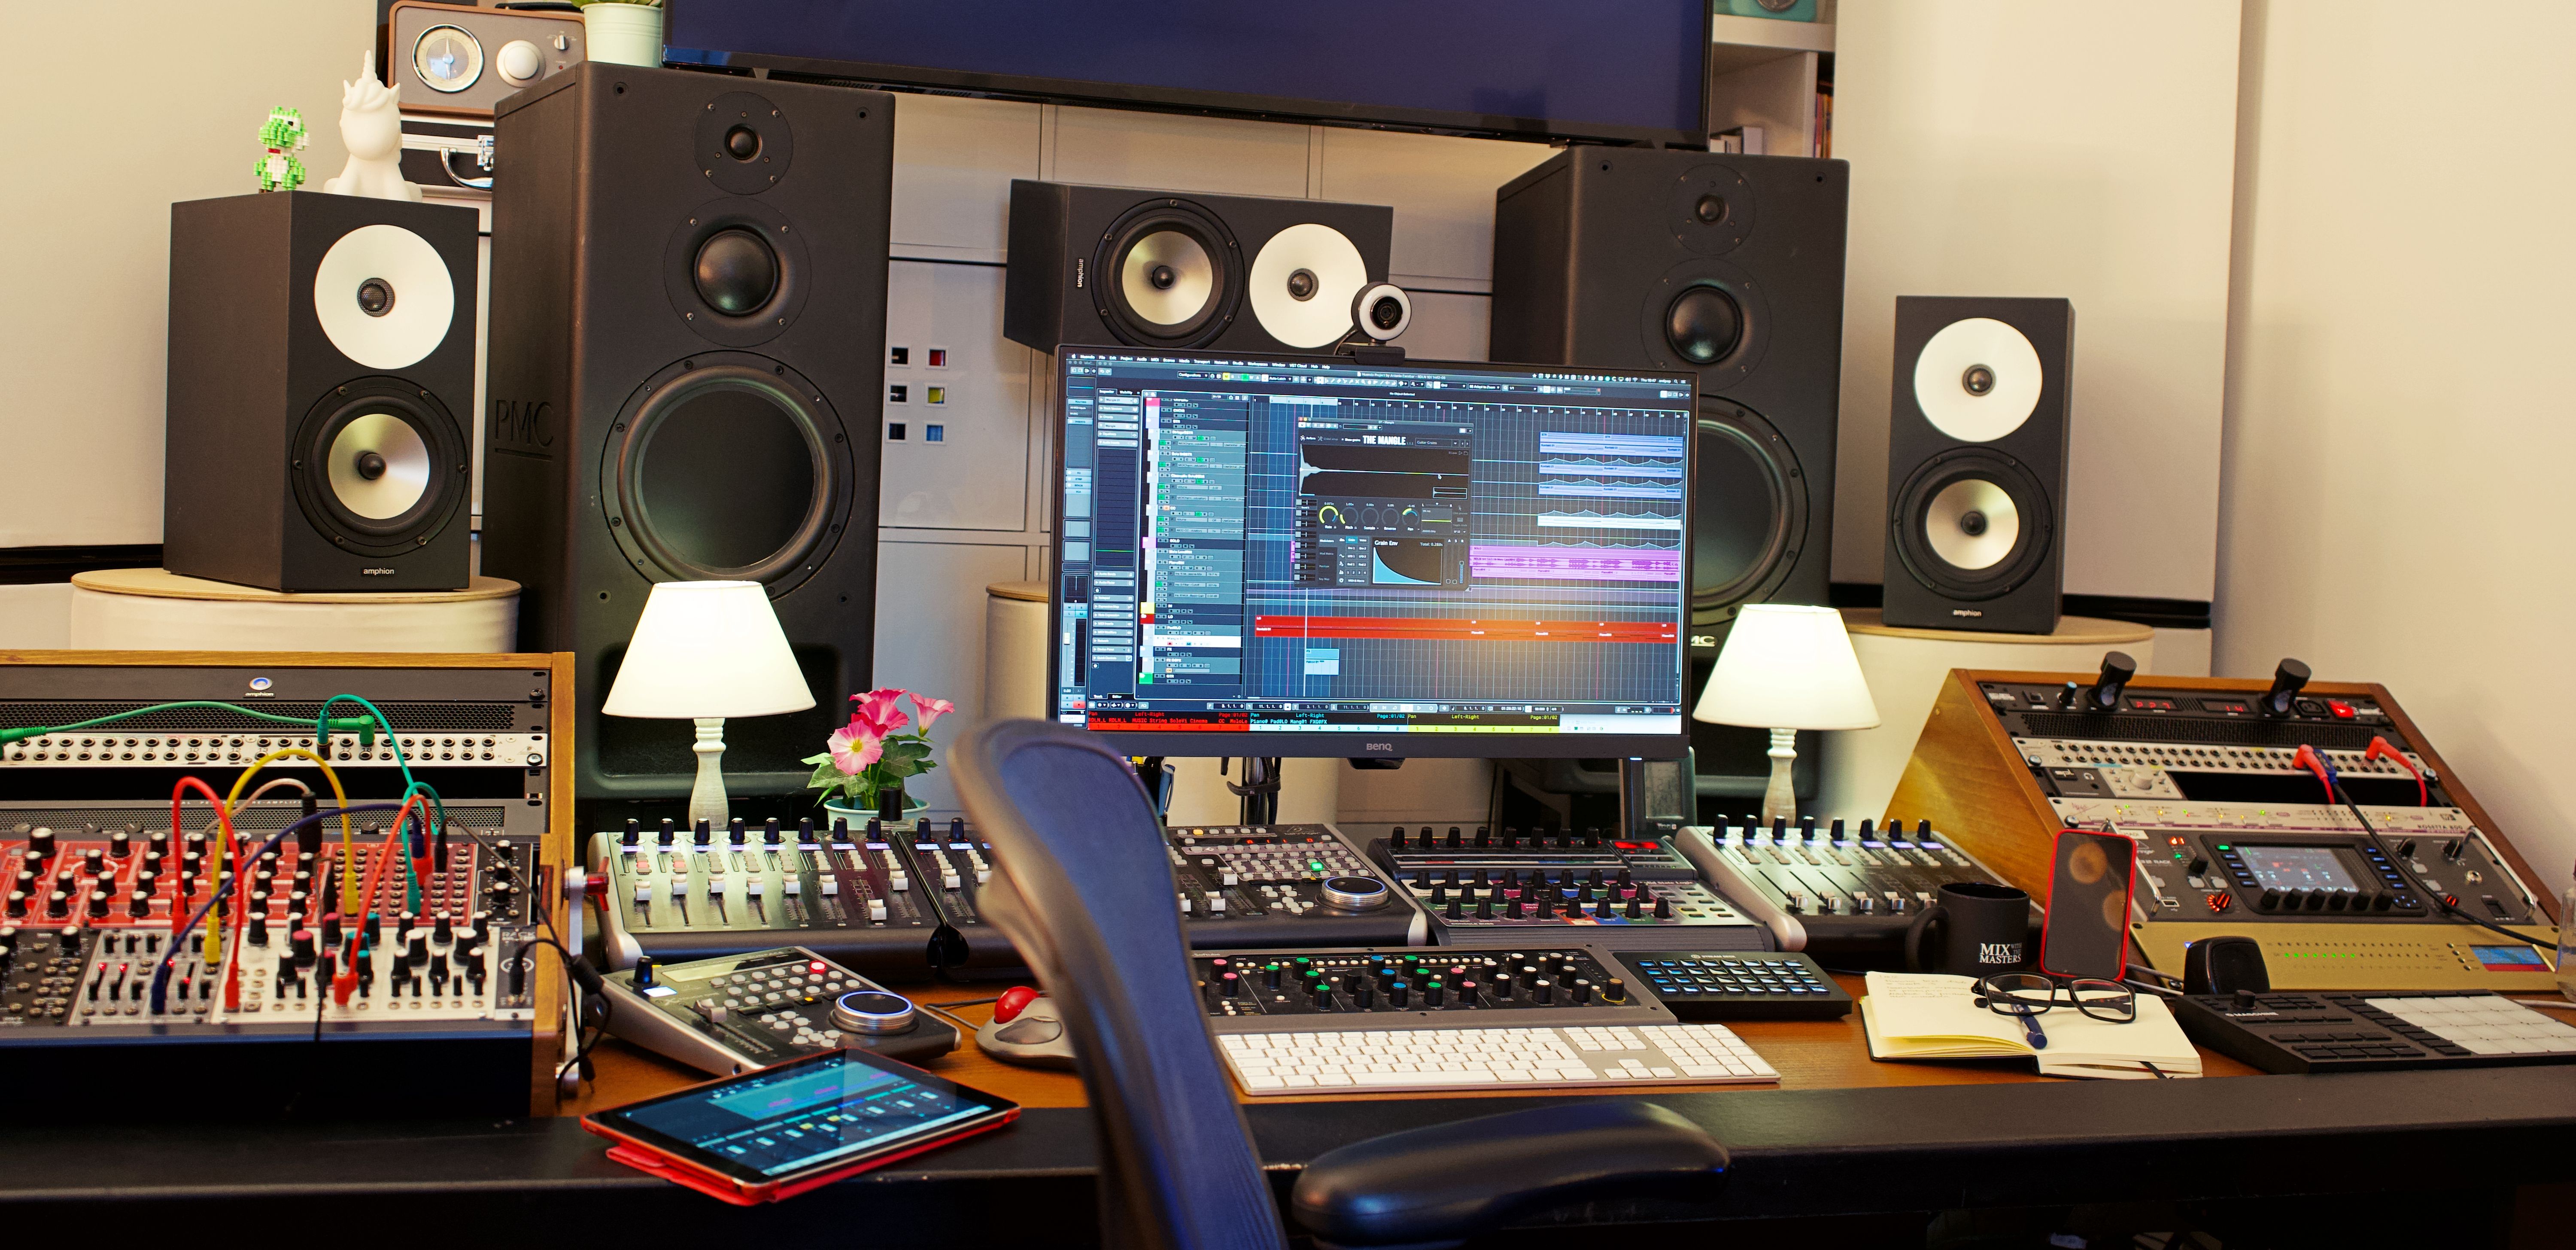 Escobar uses a mix of Amphion One18 and One12 monitors to give him the clarity and control he needs for mixing in surround sound.